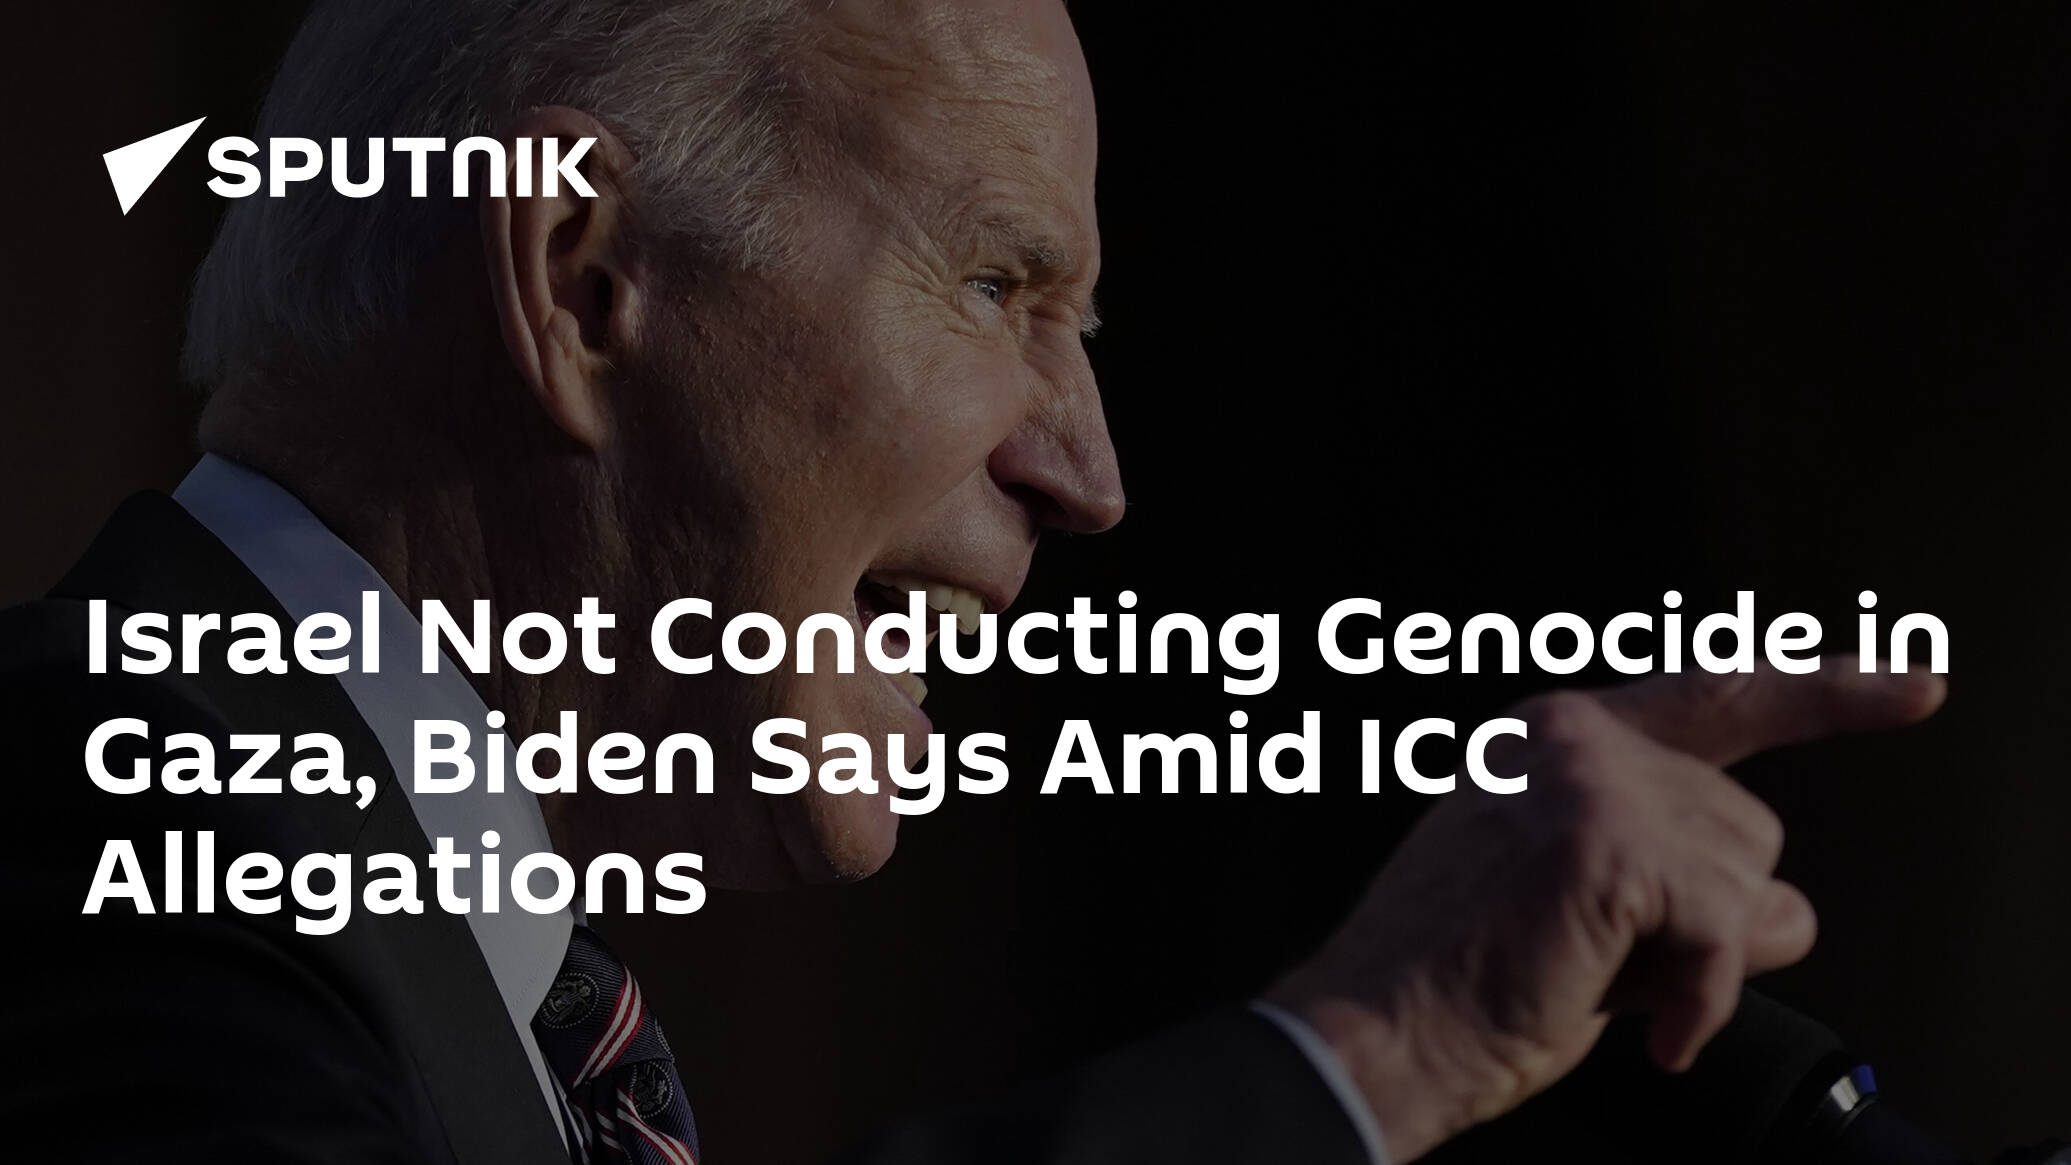 Biden Says Amid ICC Allegations Israel Not Conducting Genocide in Gaza